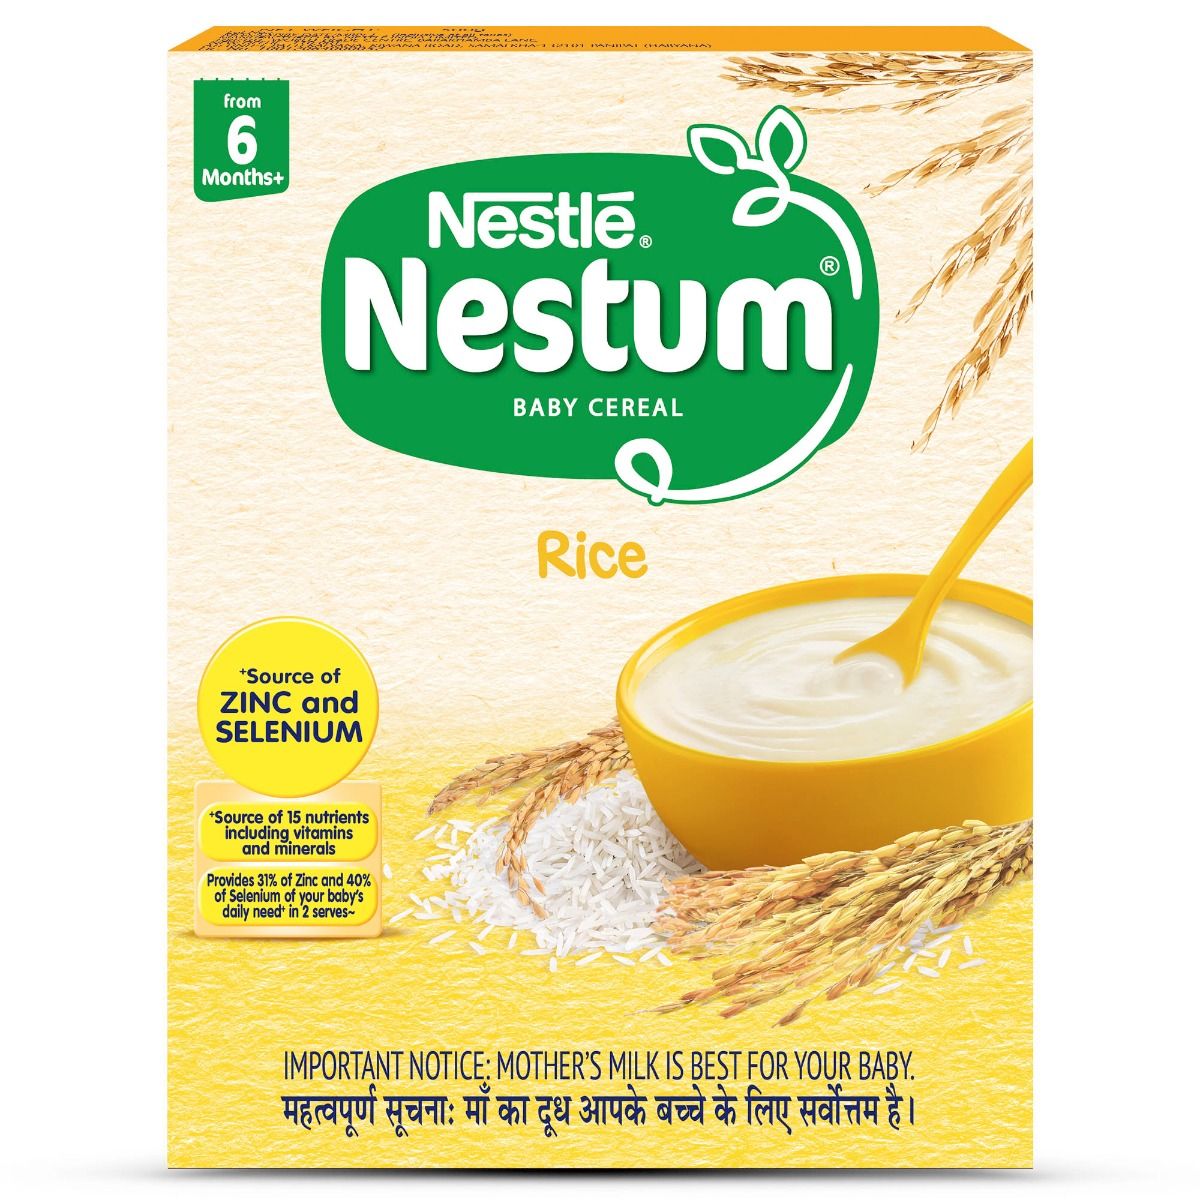 Buy Nestle Nestum Baby Cereal Rice (After 6 Months) Powder, 300 gm Refill Pack Online